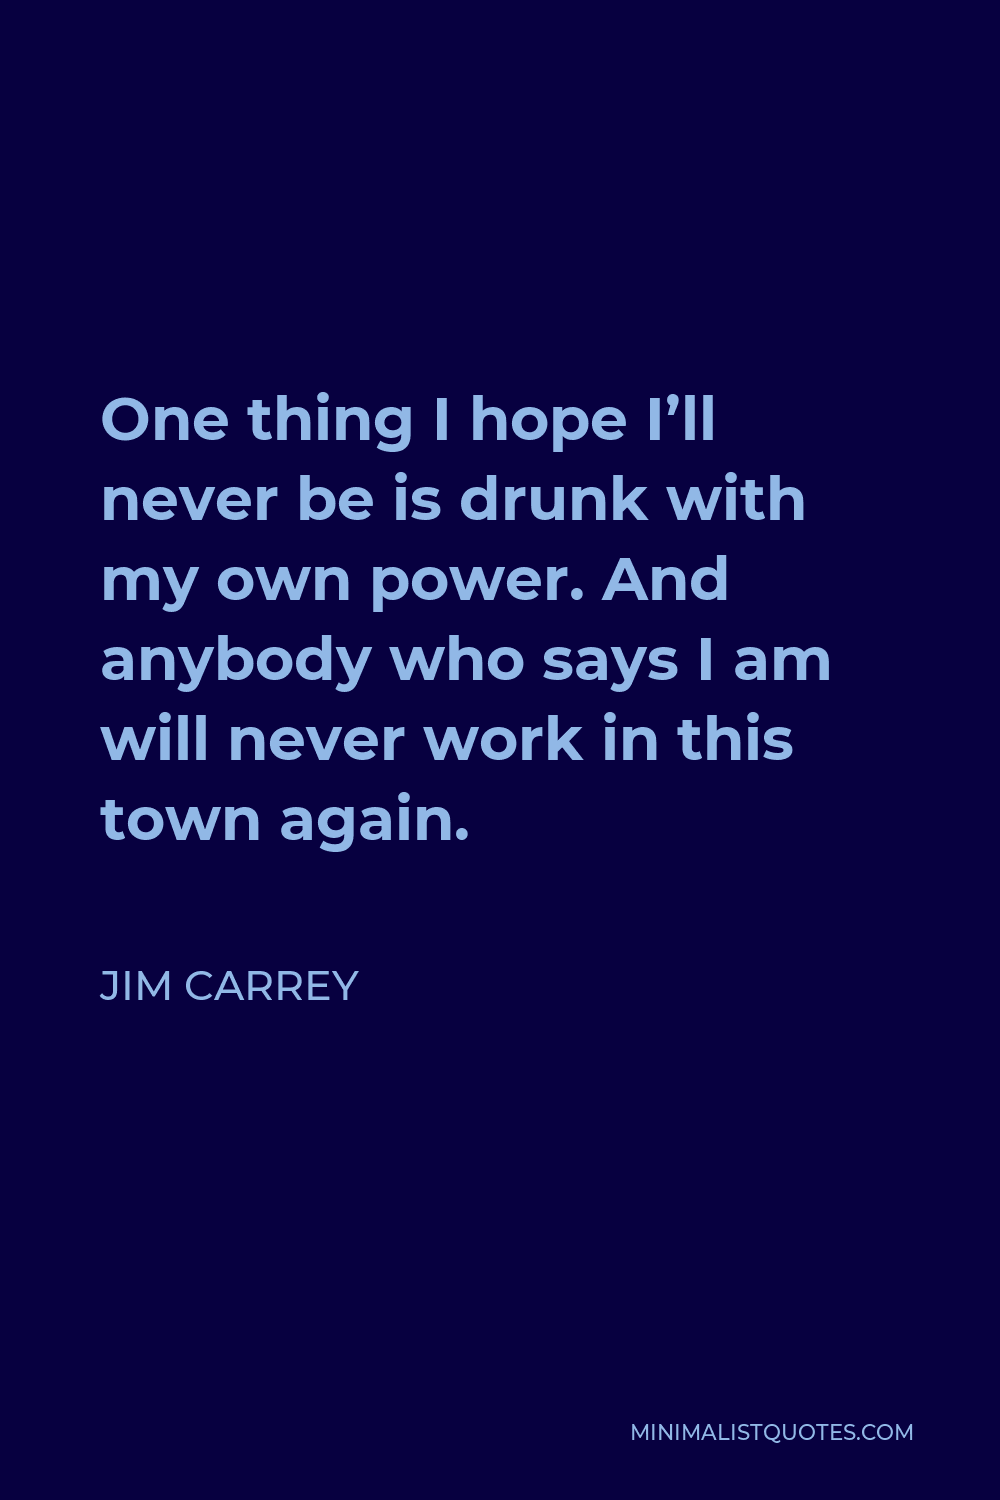 Jim Carrey Quote - One thing I hope I’ll never be is drunk with my own power. And anybody who says I am will never work in this town again.